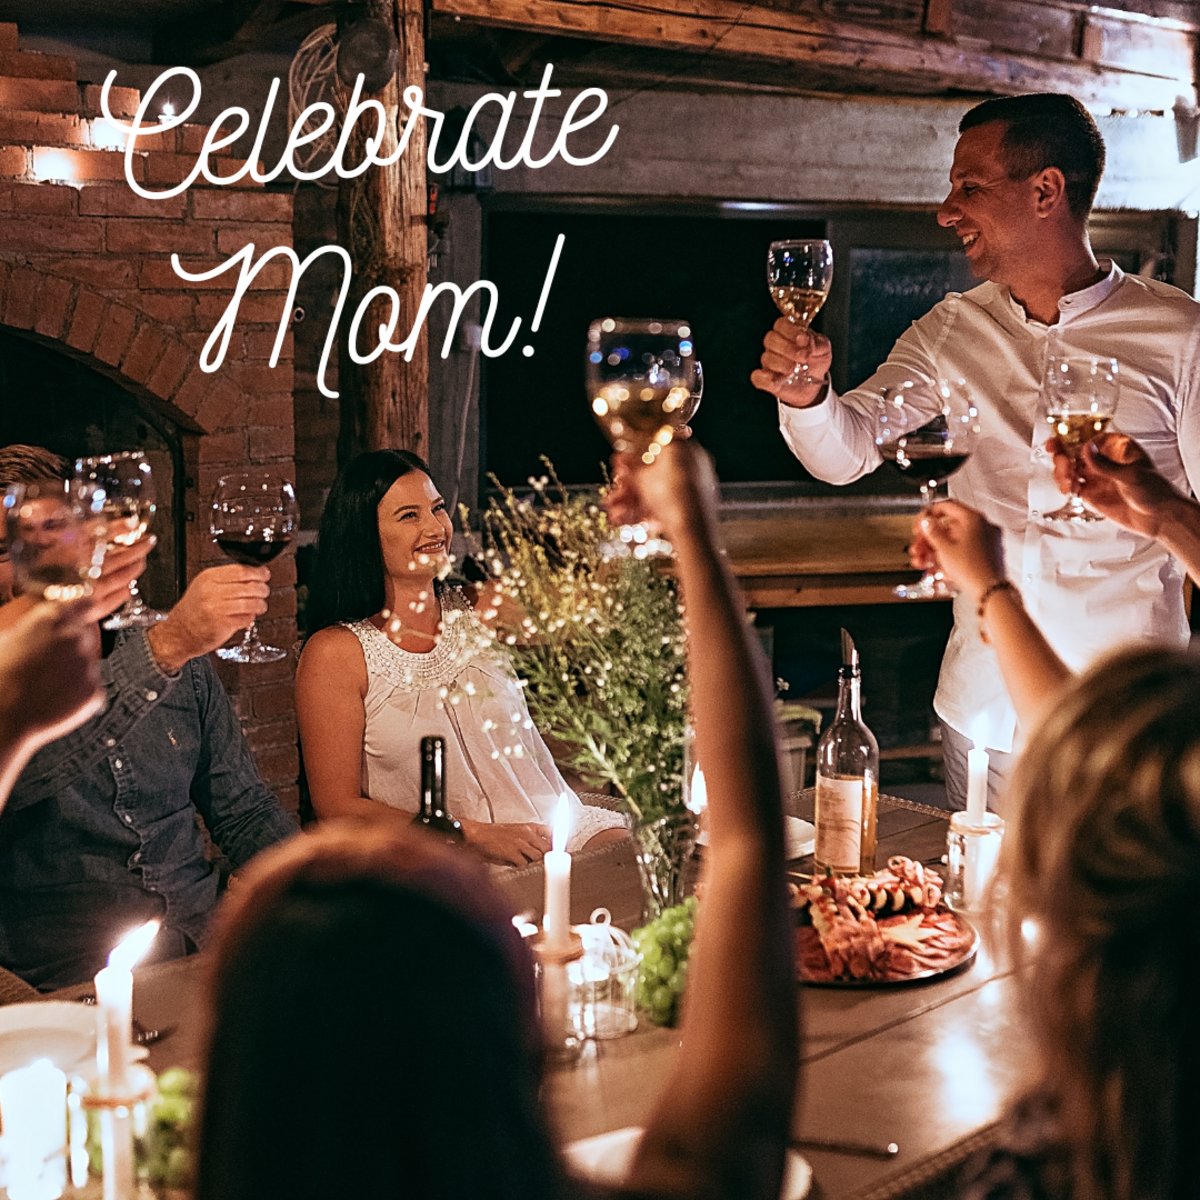 Celebrate Mother’s Day at Jackson’s Steakhouse with a delicious lunch or dinner on Sunday, May 12th! Indulge your tastebuds with special lunch and dinner menus. Bon Appétit! bit.ly/3vZsKC0 #momsday #celebrate #dinner #lunch